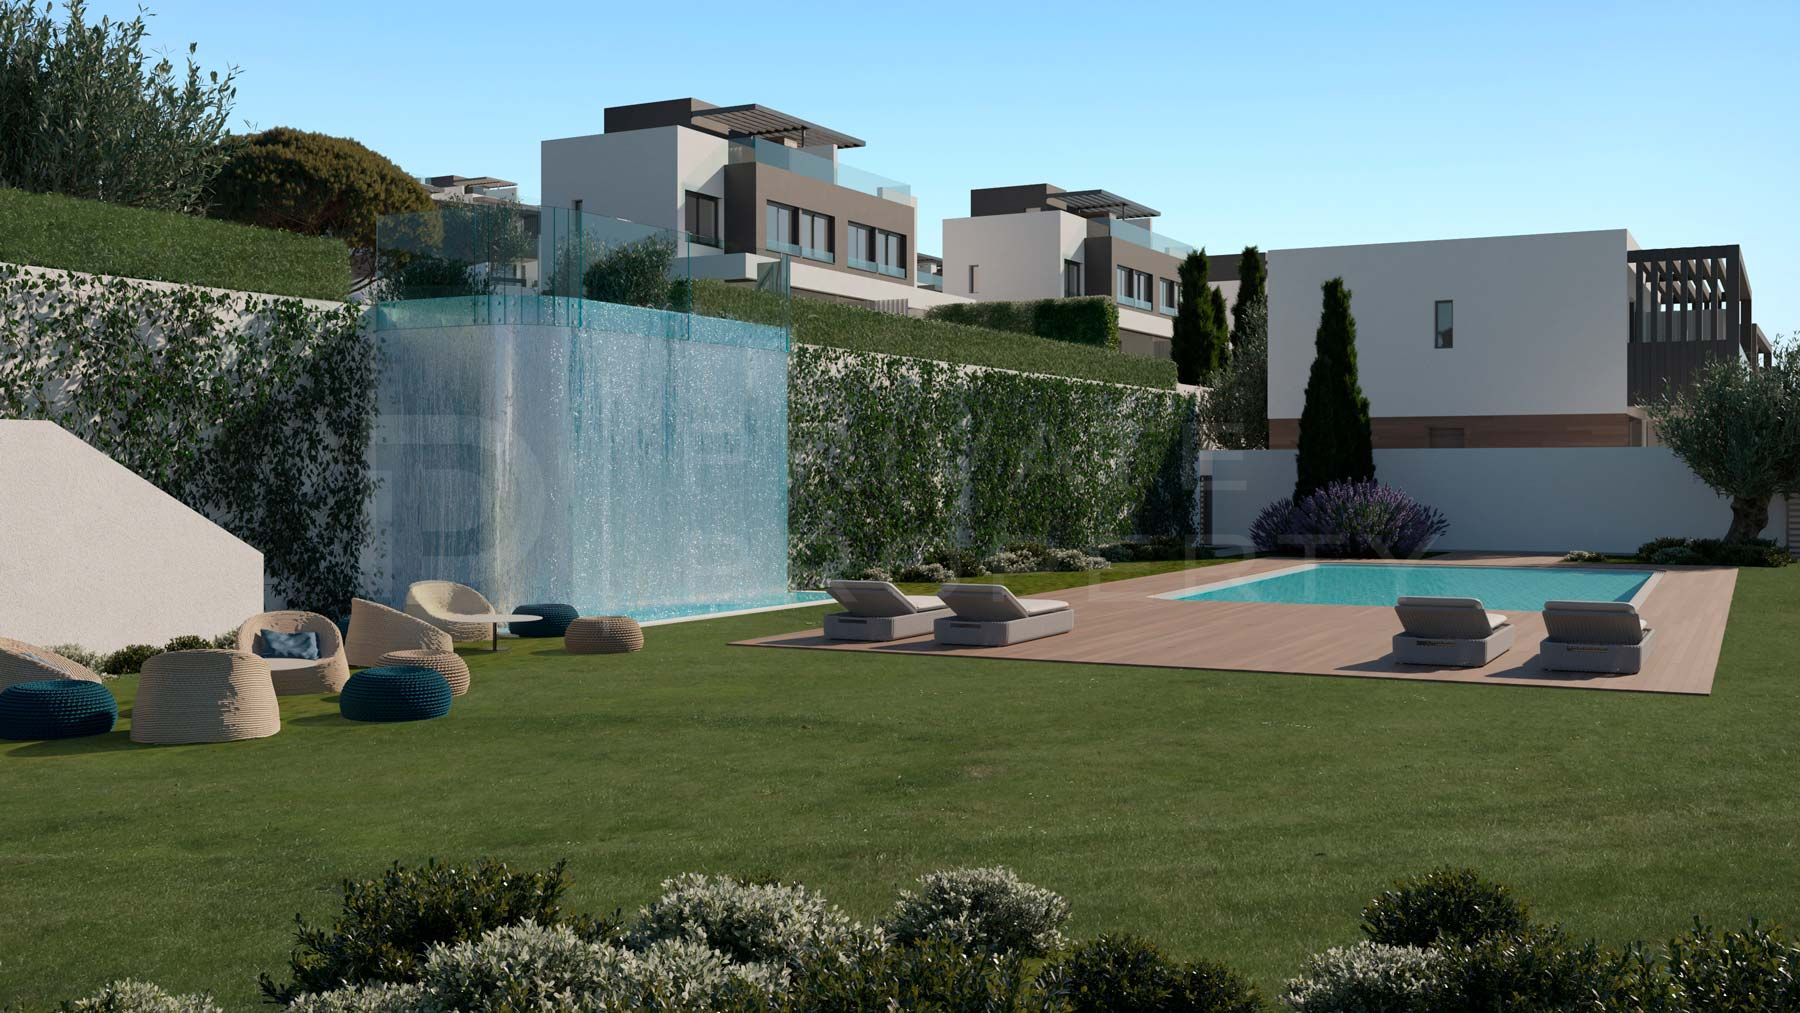 50 First Line Golf semi-detached villas. Located next to the Atalaya Golf Country Club